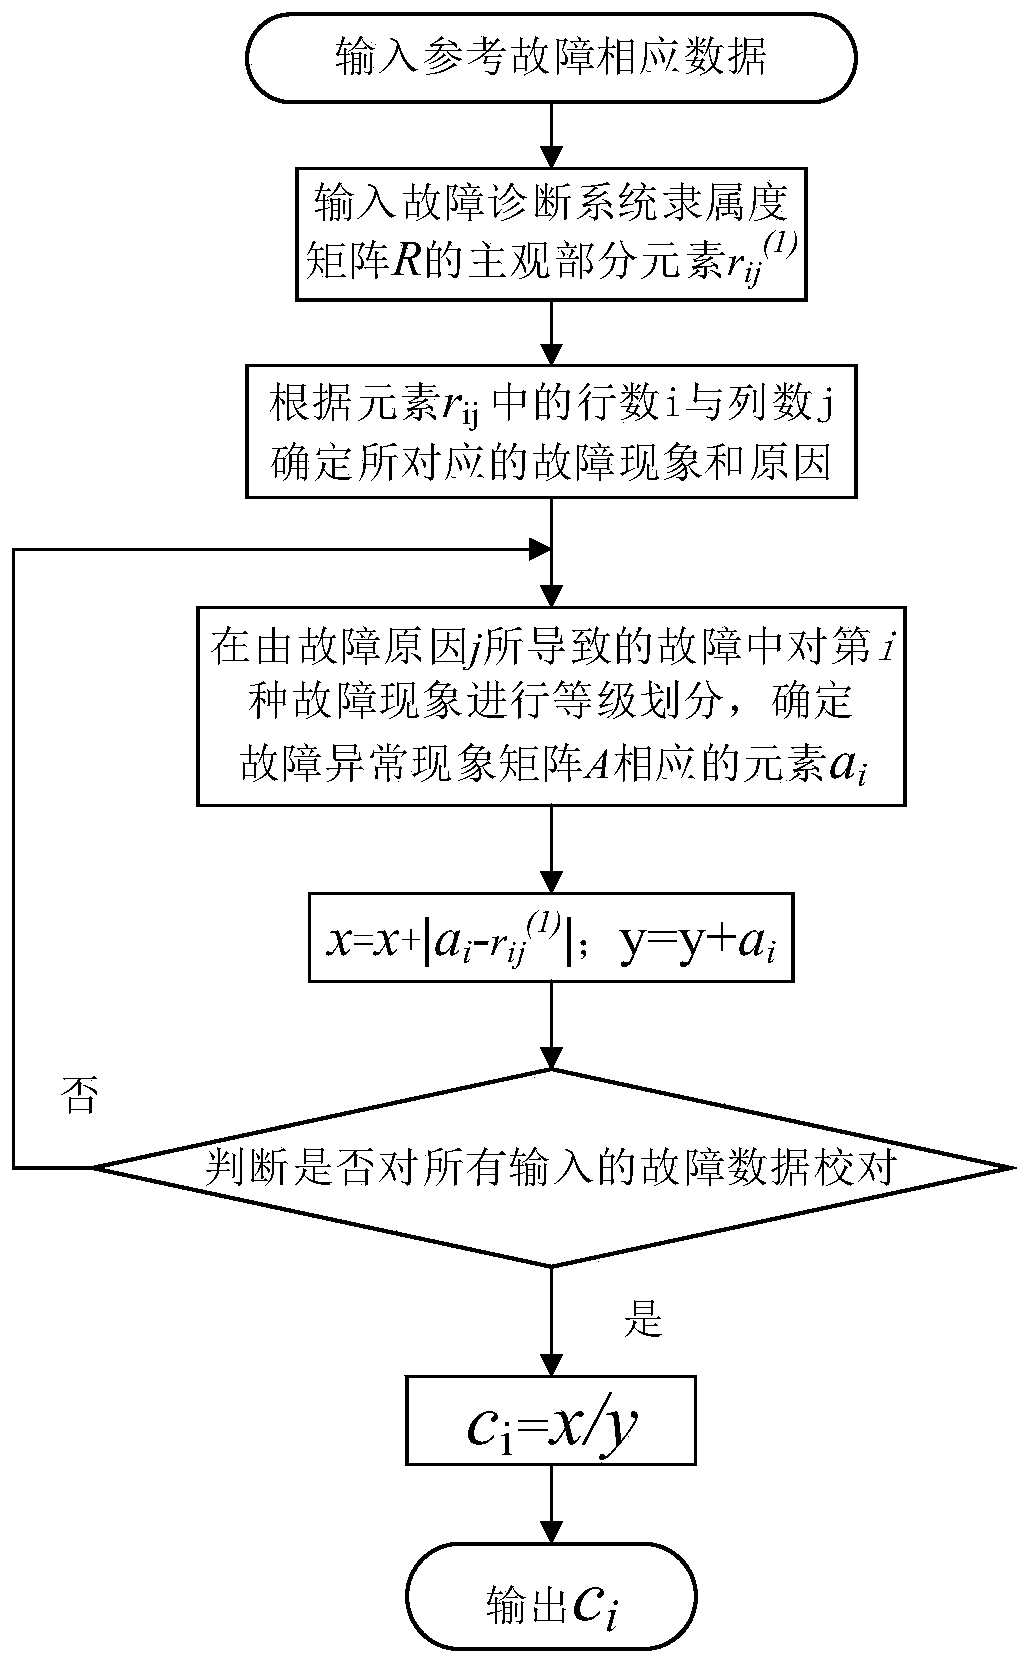 Power consumption information acquisition fault diagnosis method and system with inductive learning